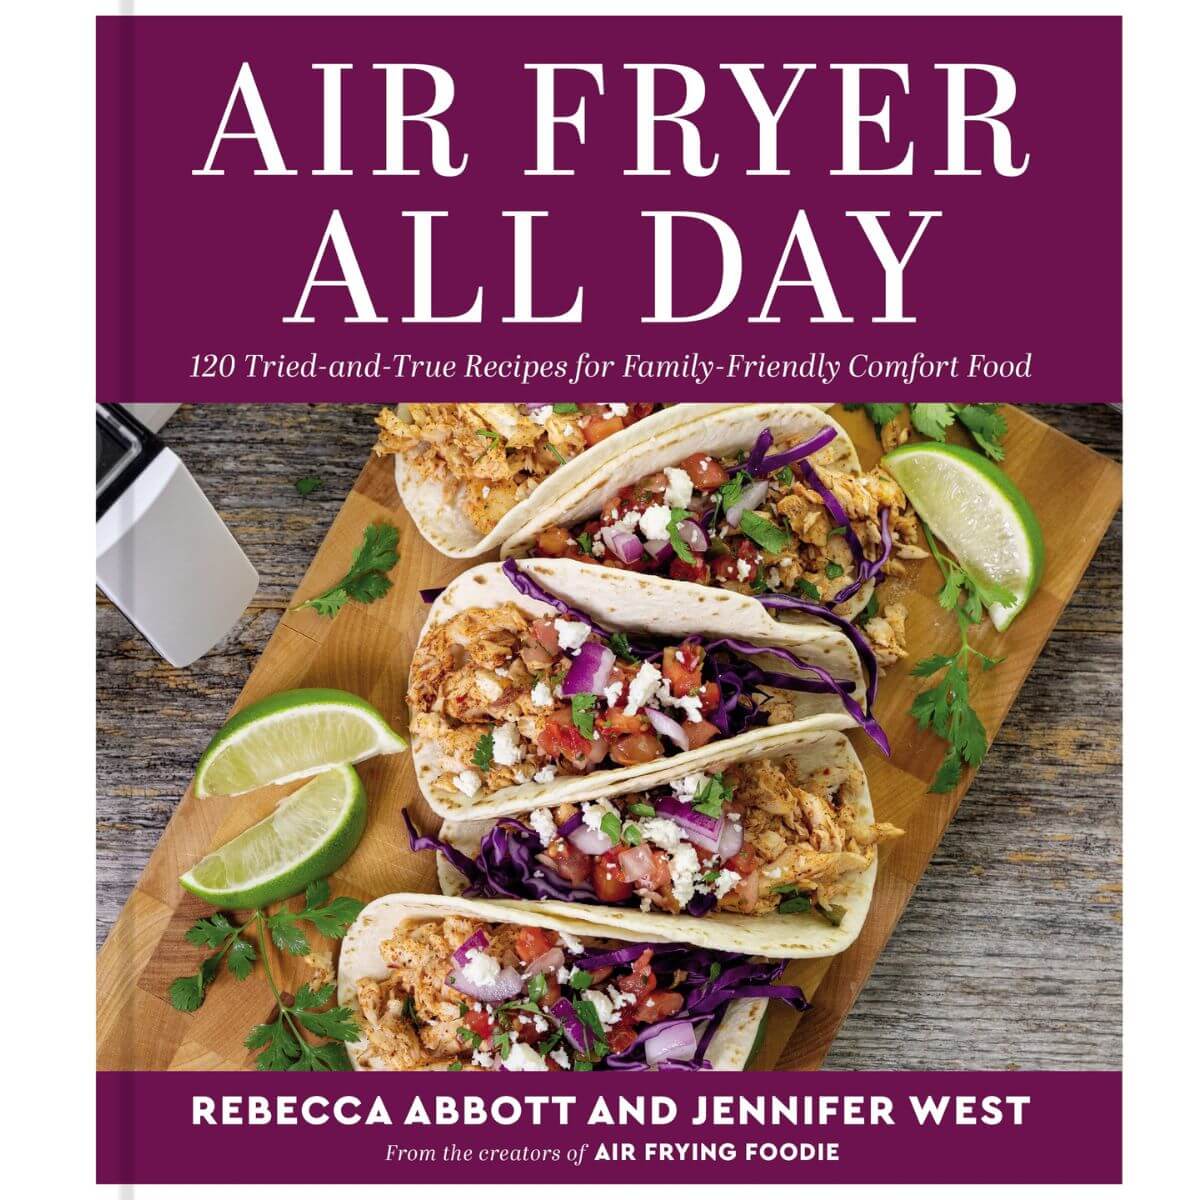 Air Fryer All Day cookbook cover